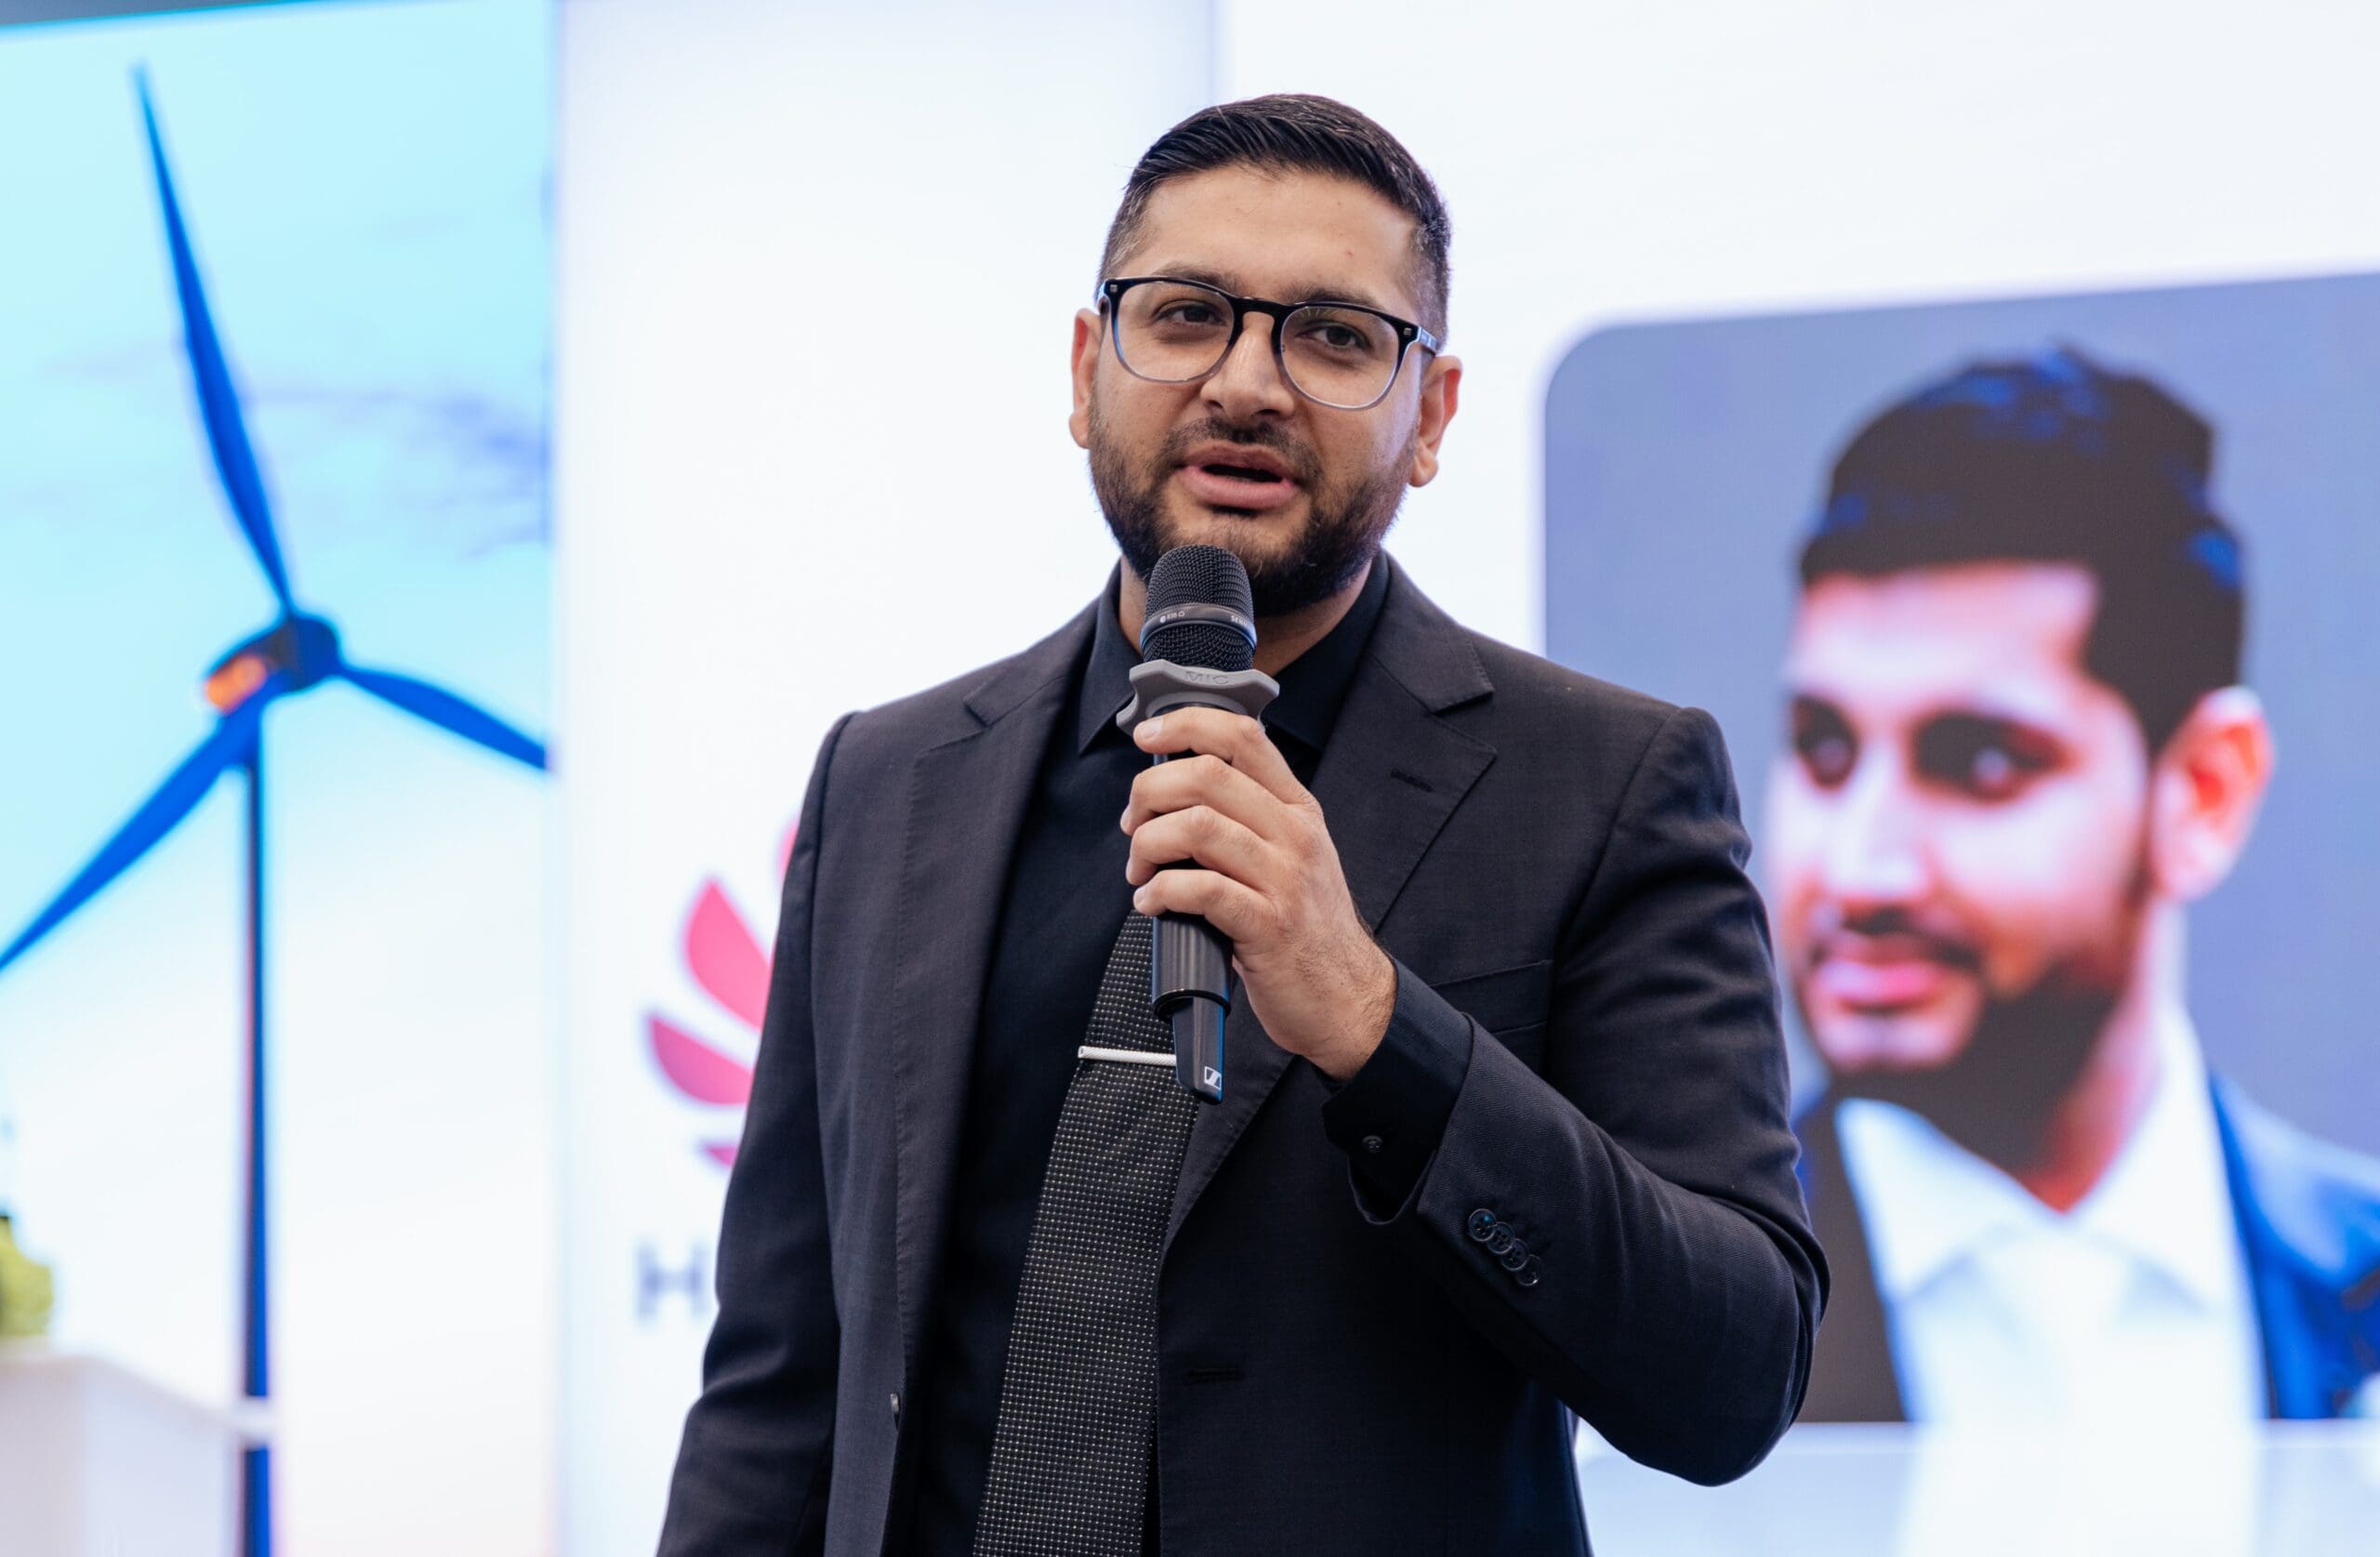 Mohammed Bismilla, Head of Emerging Talent at Huawei South Africa